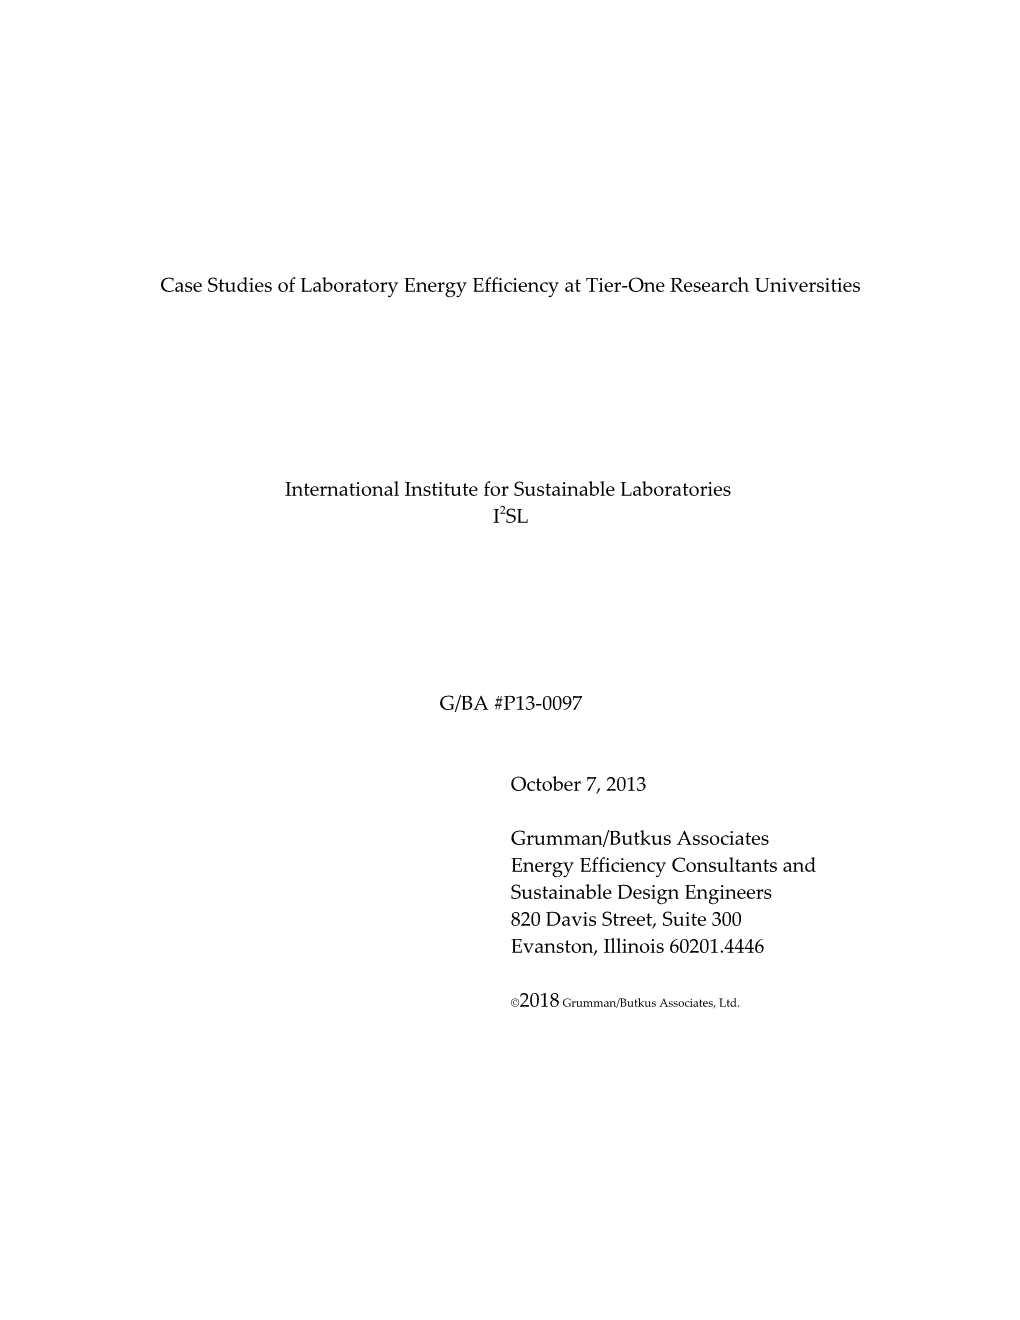 Case Studies of Laboratory Energy Efficiency at Tier-One Research Universities